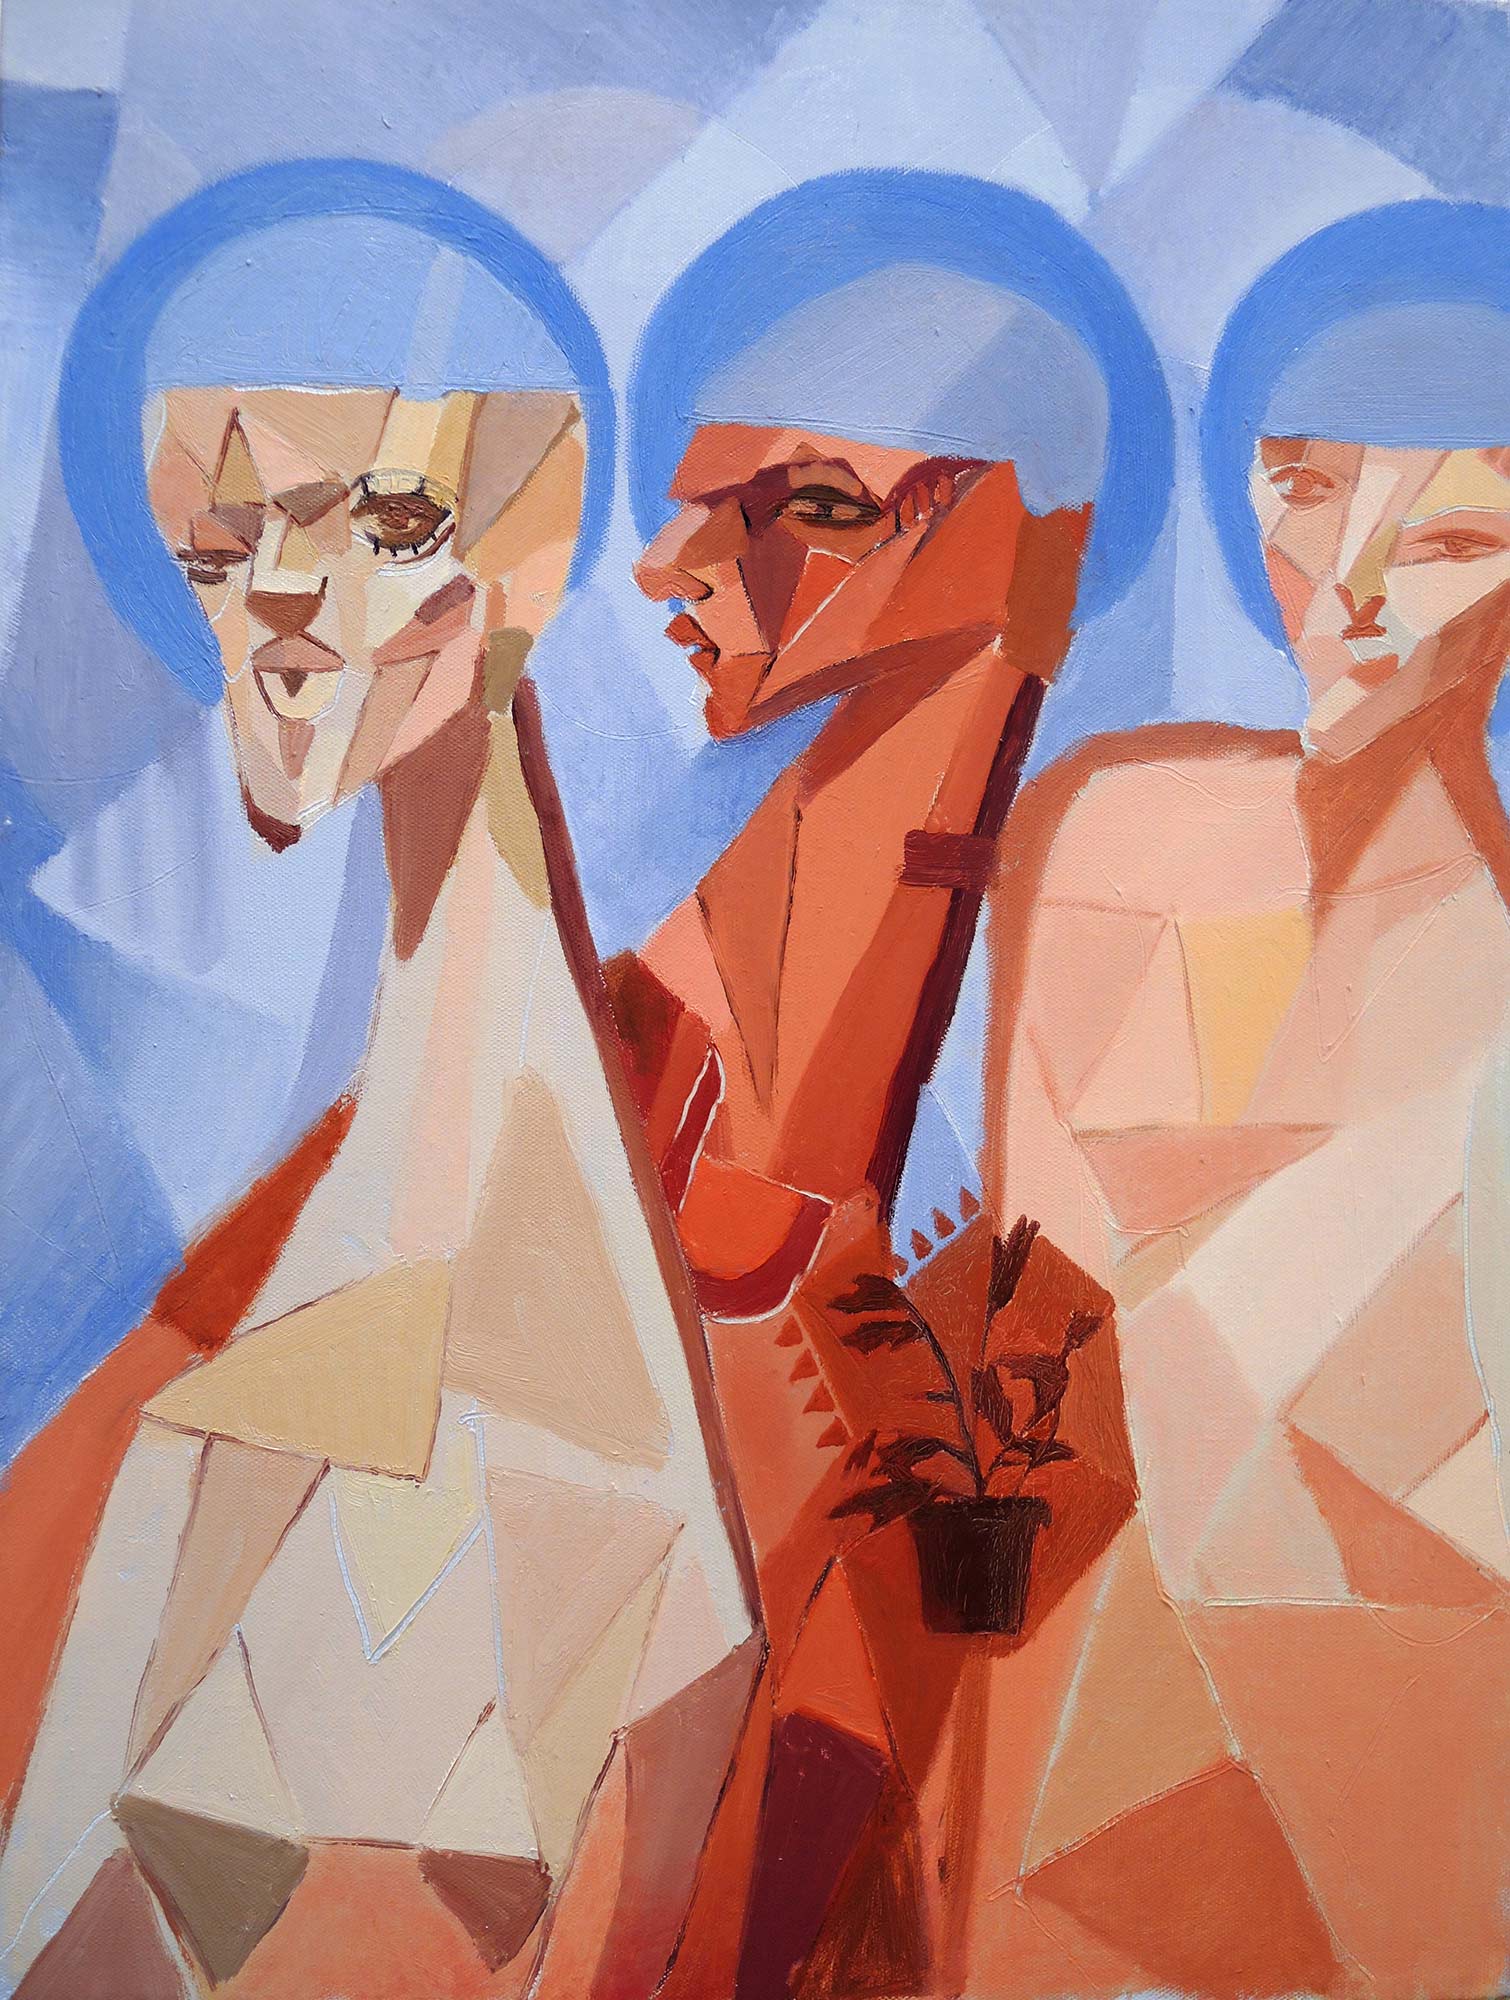 A painting of three geometric figures